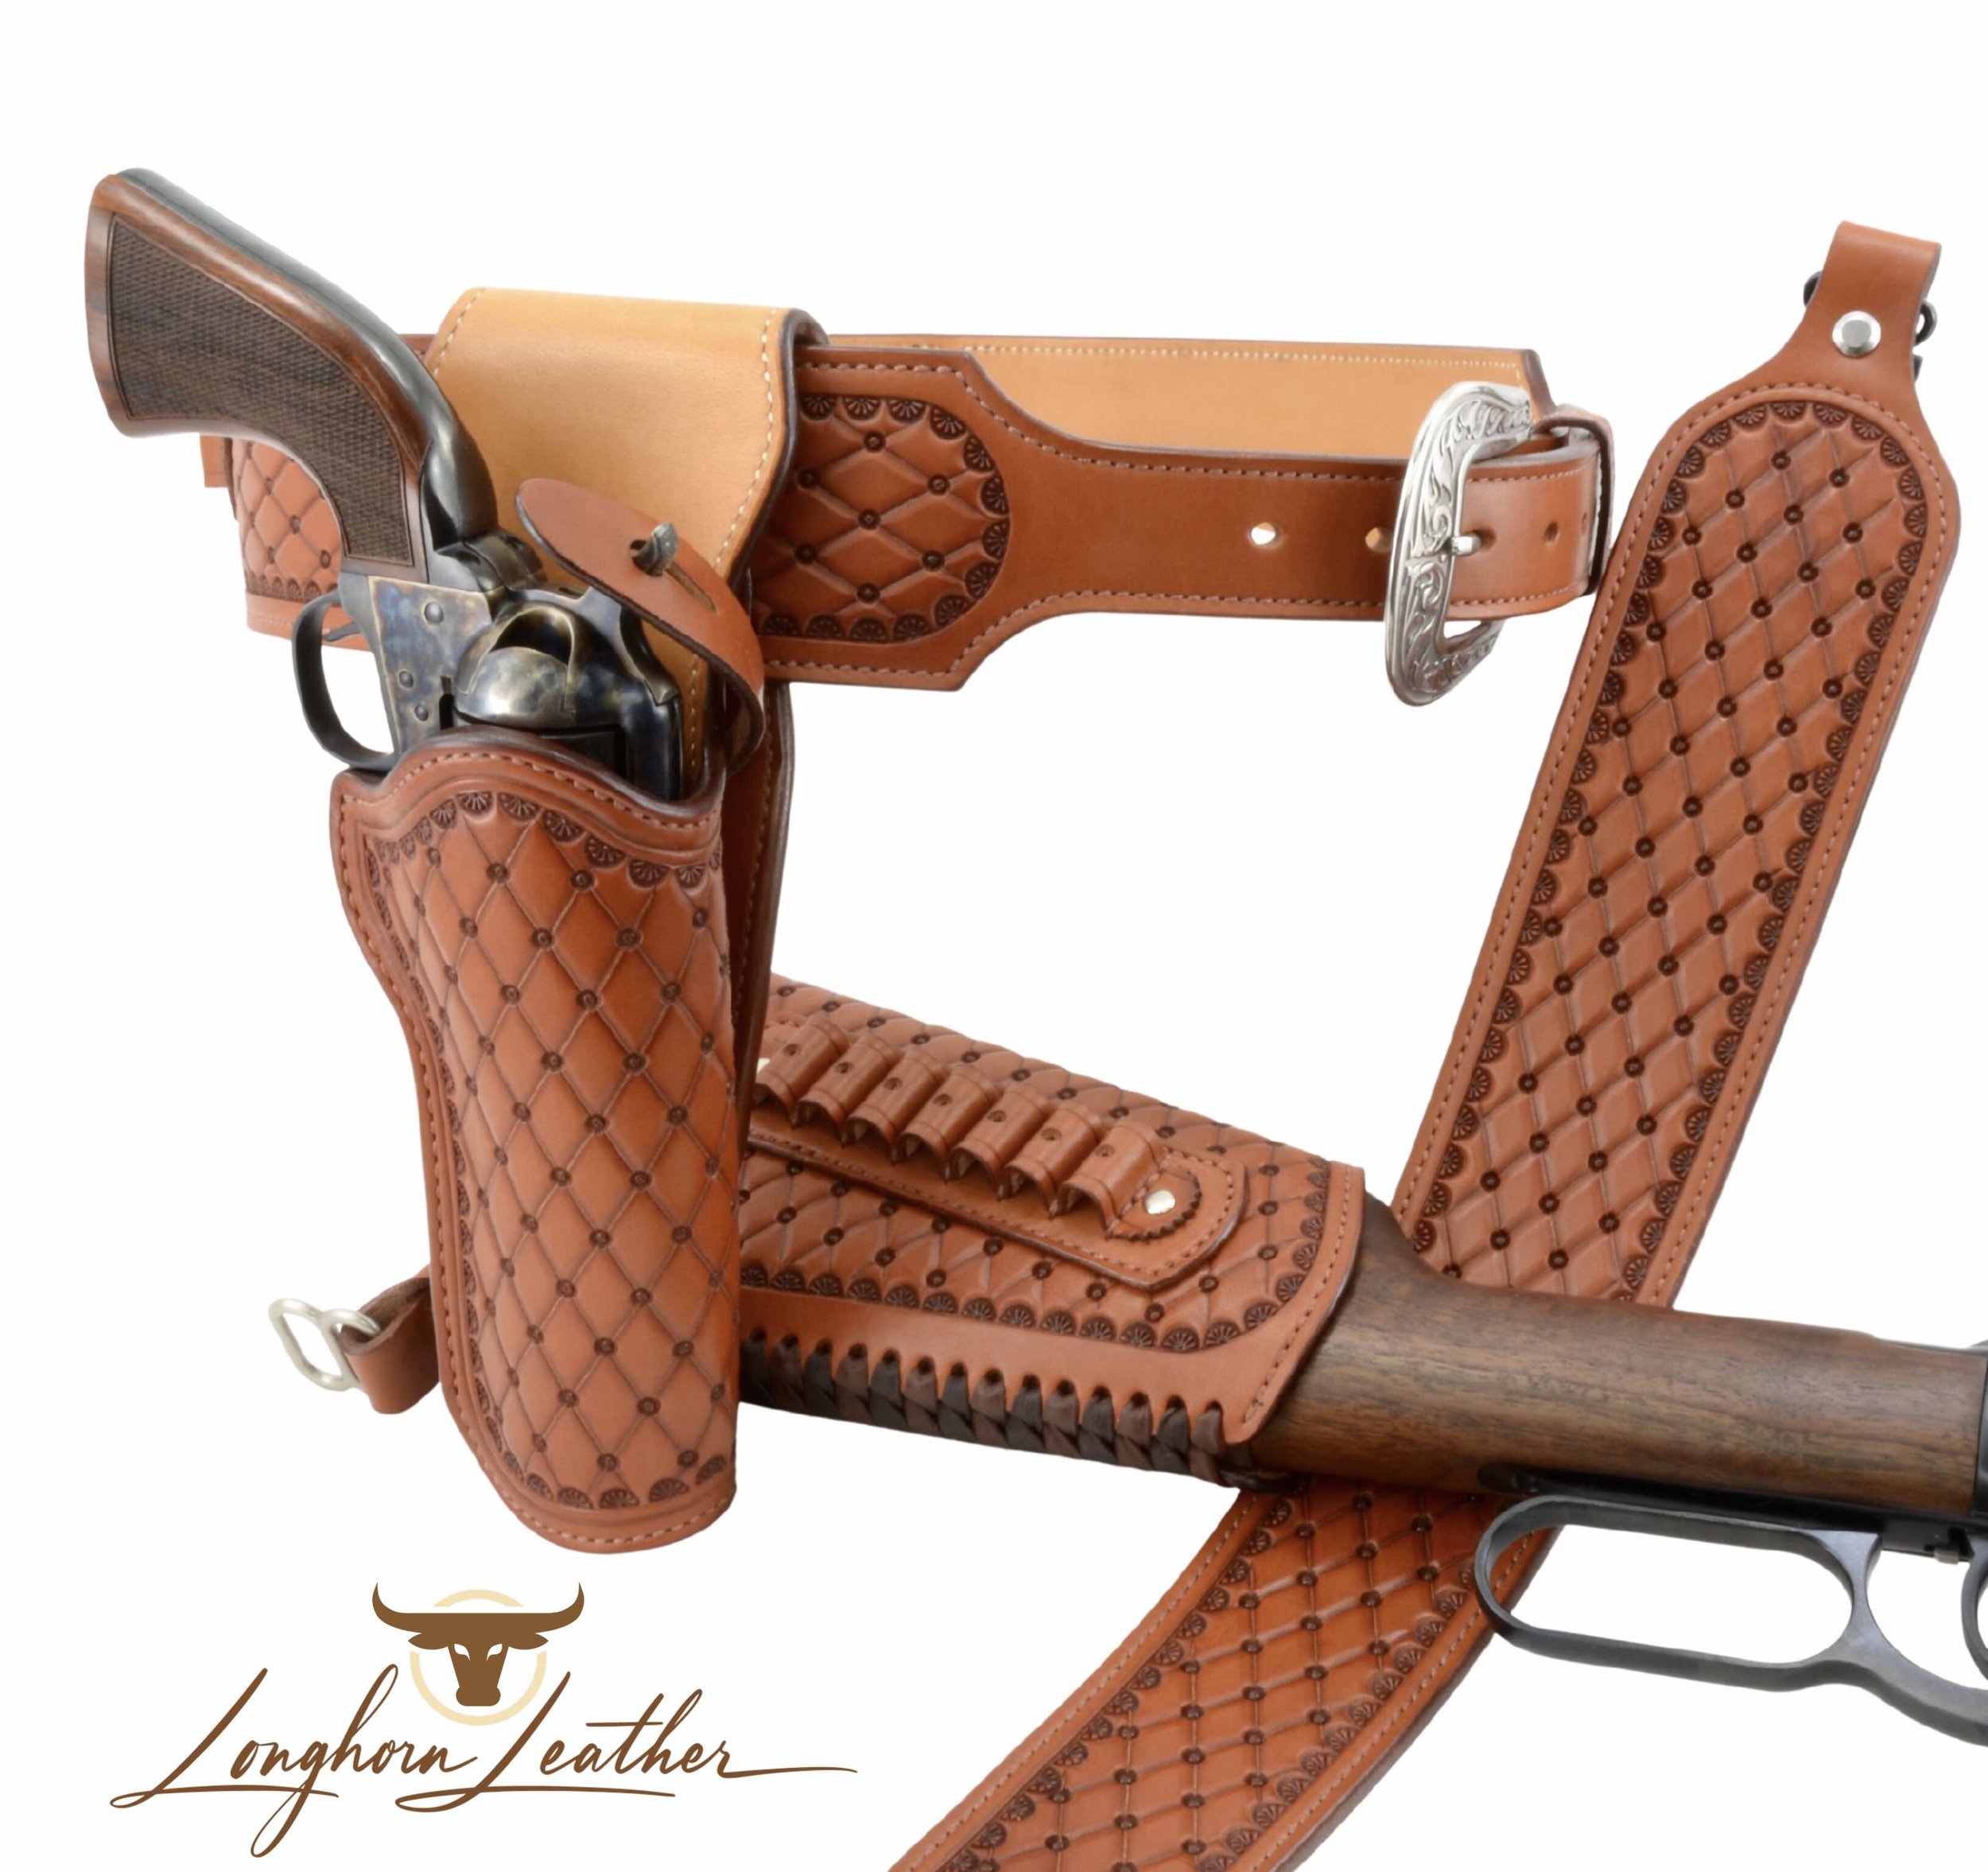 Custom leather single action holster, cartridge belt, gunstock cover & rifle sling featuring the San Carlos design. Individually handcrafted at Longhorn Leather AZ